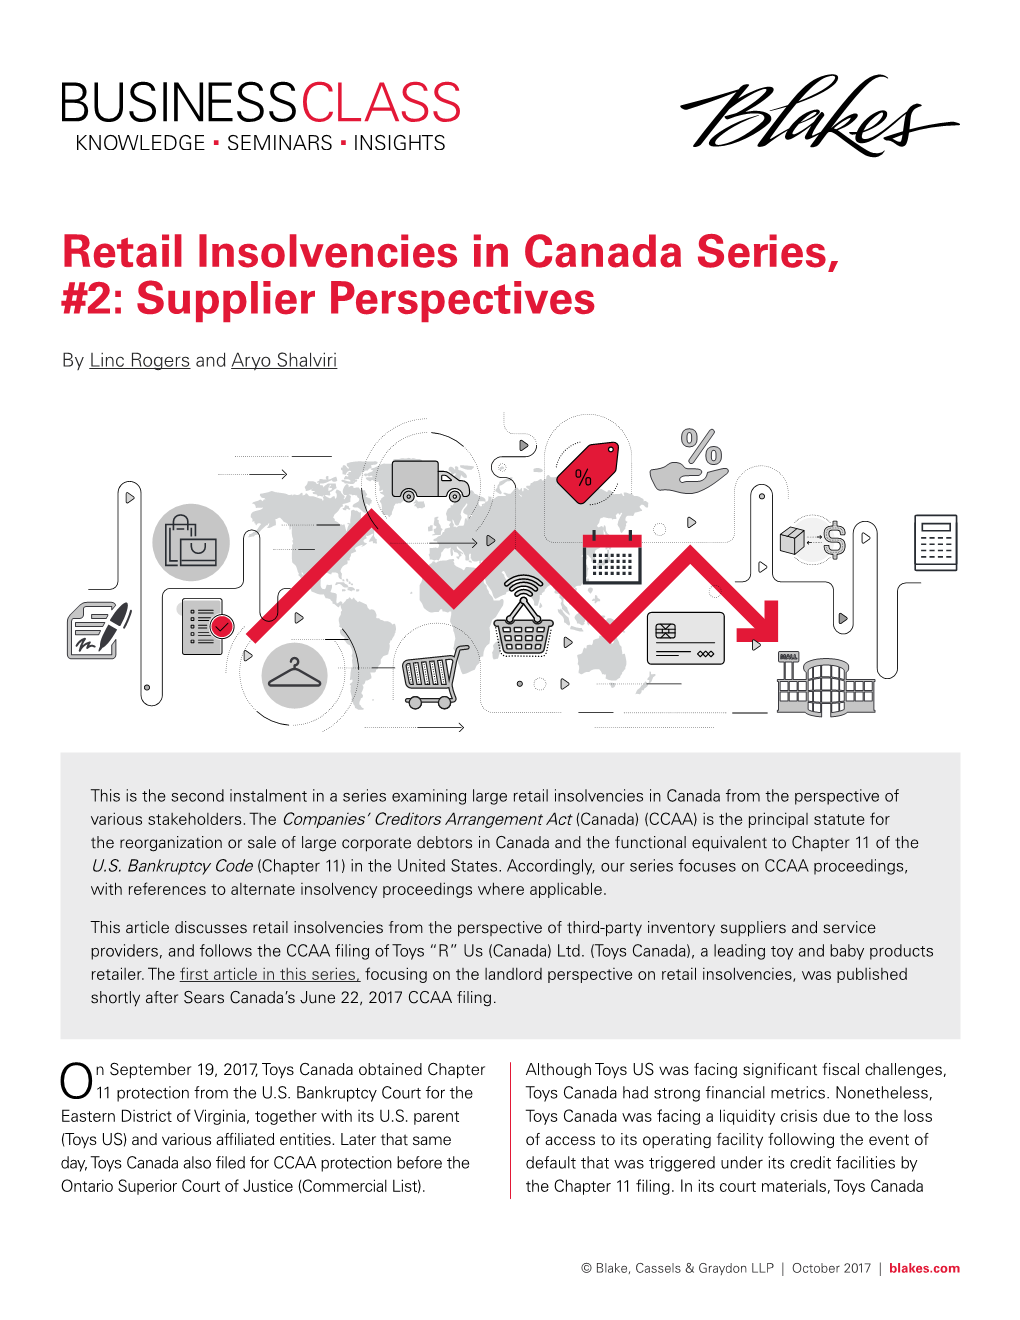 Retail Insolvencies in Canada Series, #2: Supplier Perspectives